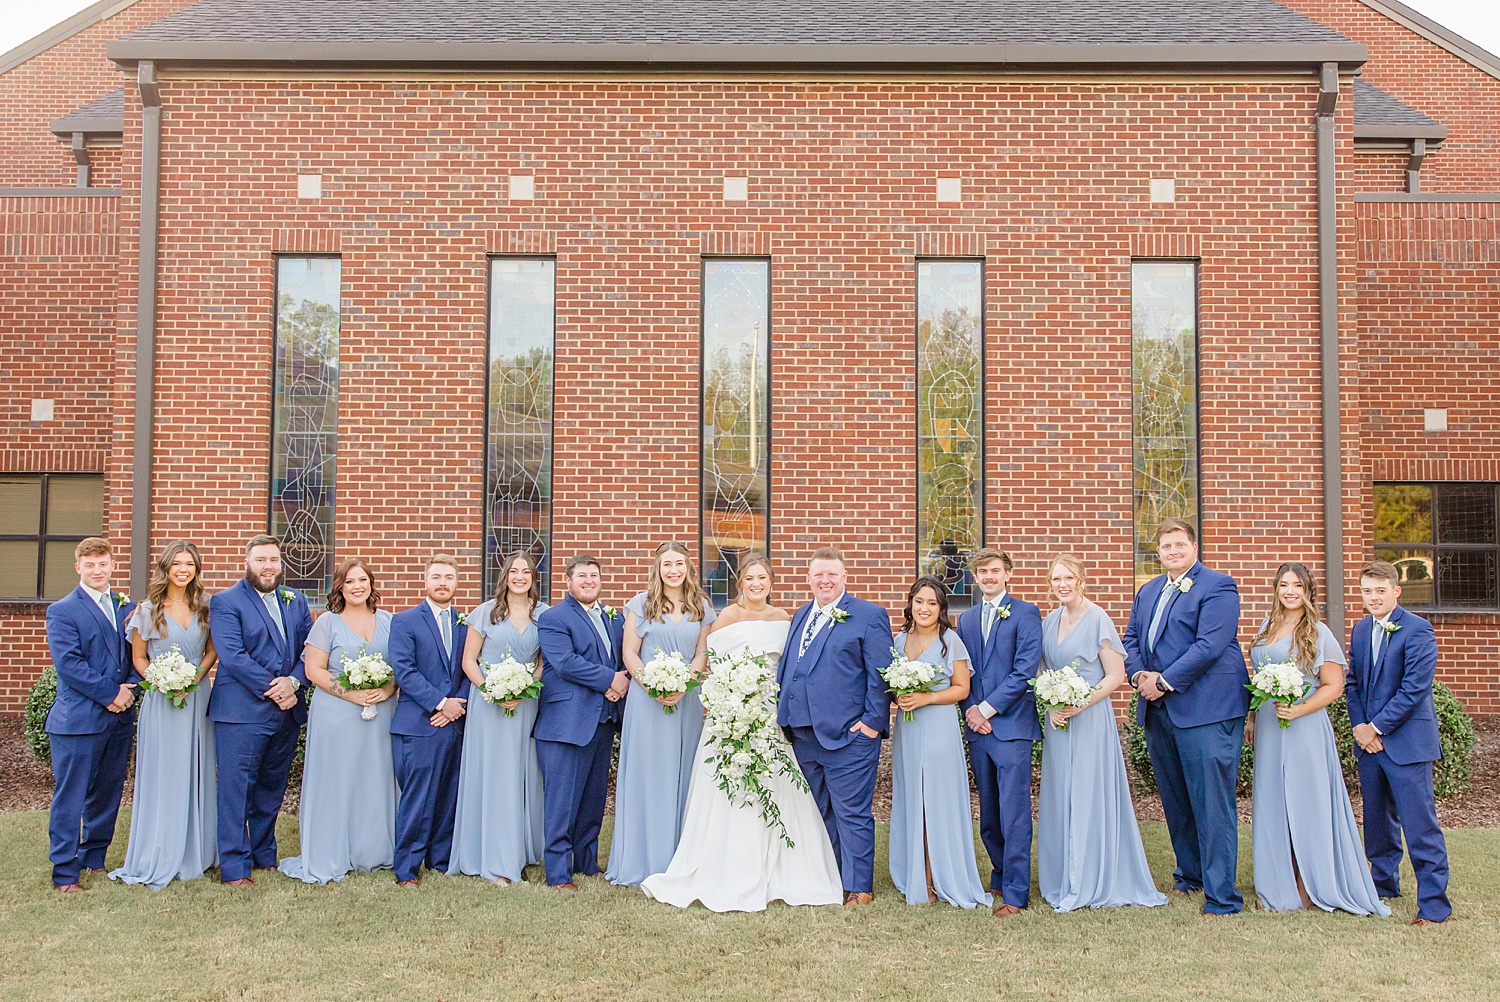 wedding party in navy and dusty blue attire